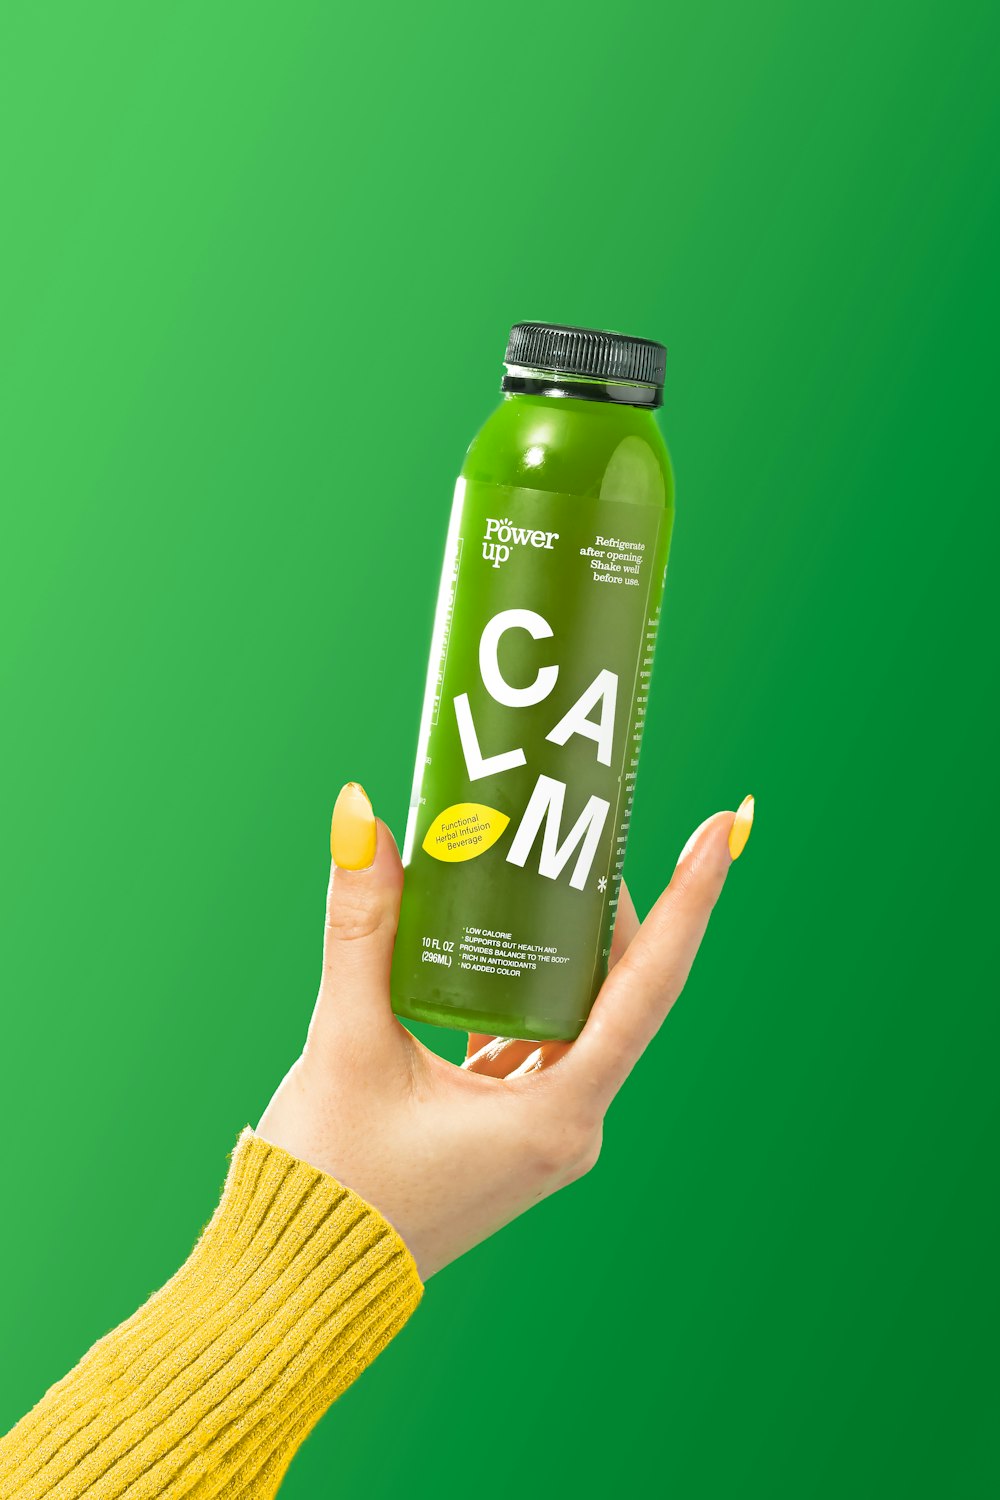 a hand holding a green can of gam on a green background